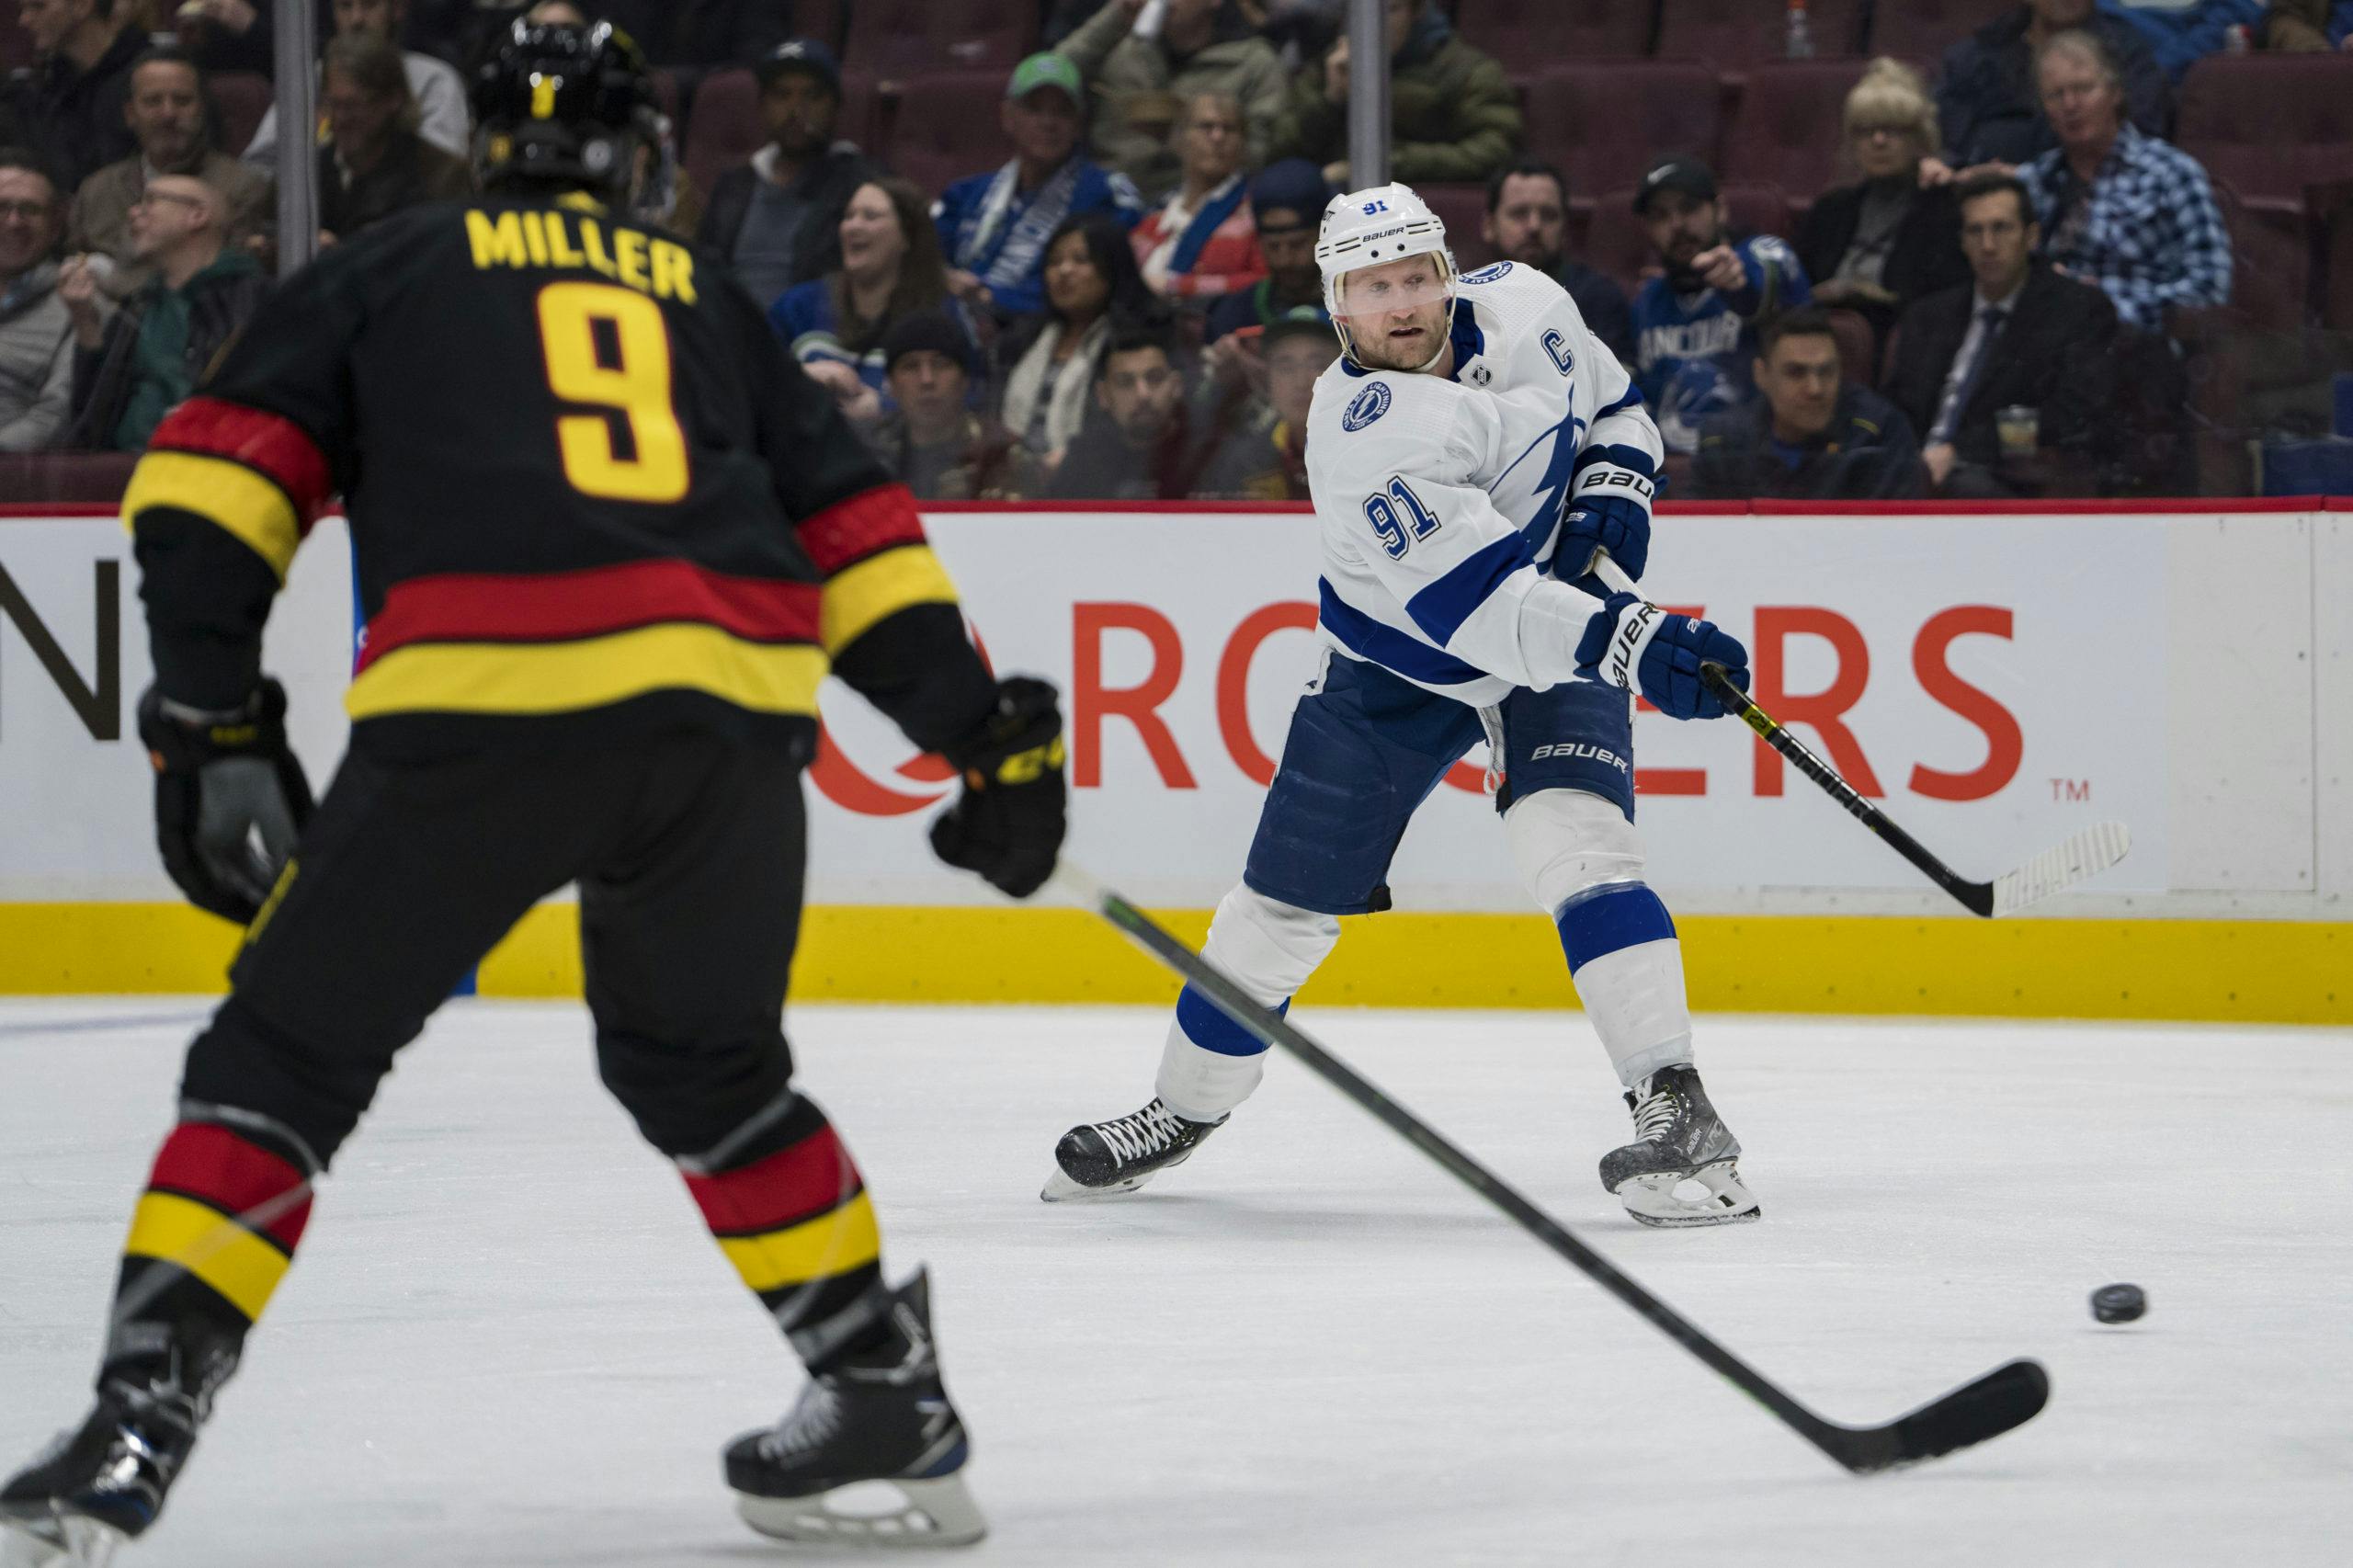 IN PHOTOS: Canucks bring back classic skate logo in loss to Maple Leafs -  BC